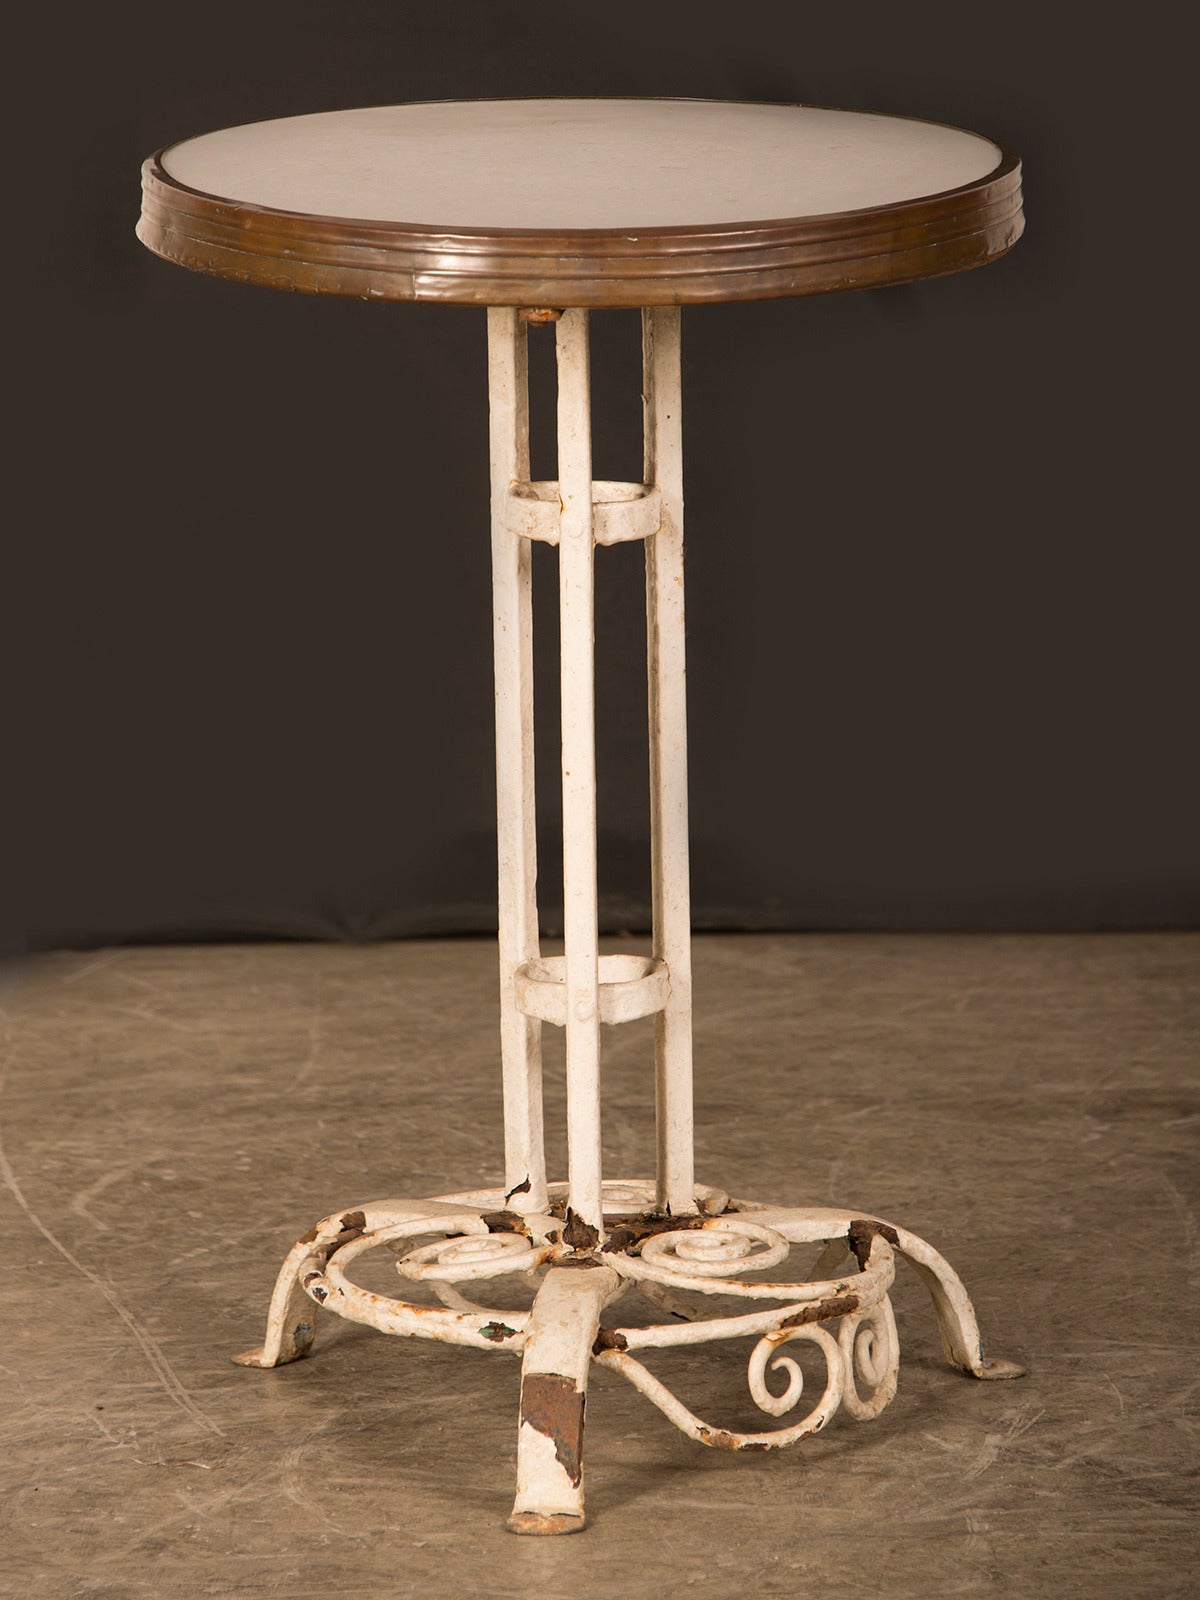 A strikingly painted iron cafe table from Munich, Germany c. 1910. This table retains its original painted finish and it is possible to see the iron underneath the paint at the base of the table. The central column has three vertical supports joined